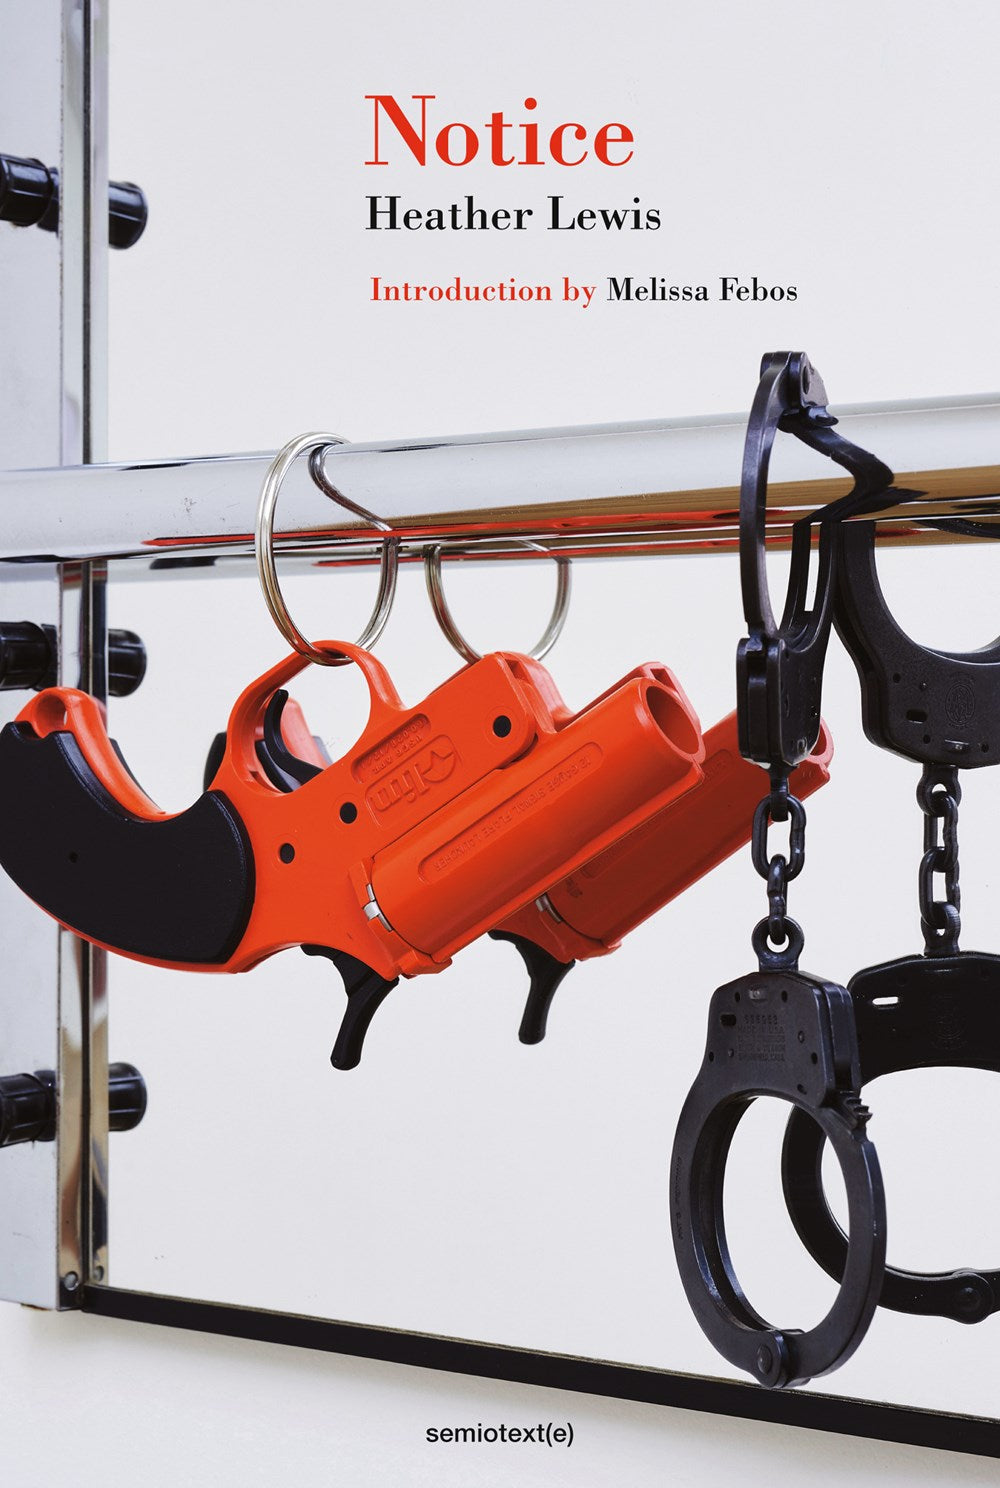 Notice by Heather Lewis (Introduction by Melissa Febos) (3/26/24)